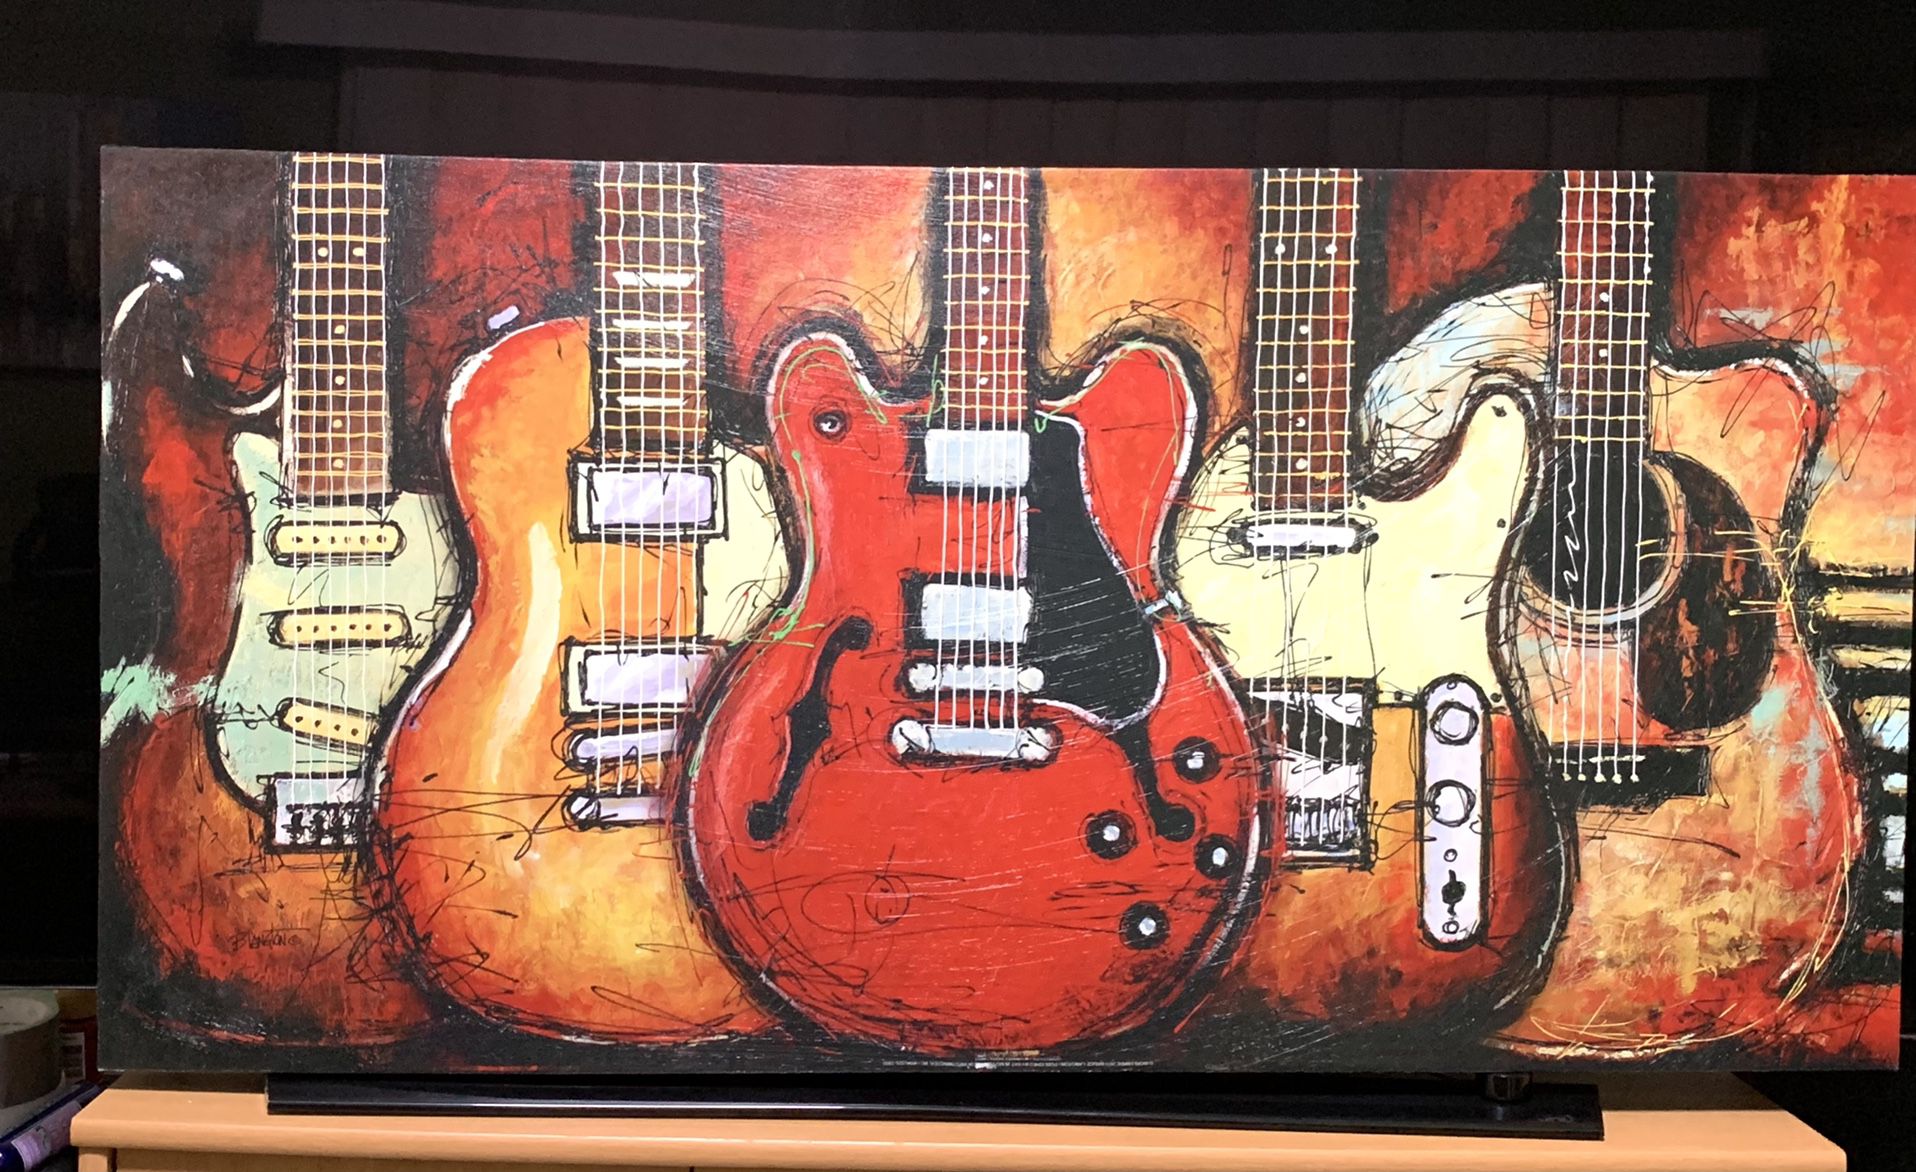 5 GUITARS FENDER/GIBSON ELECTRIC/ACOUSTIC CONAVS WALL HANGING ART DECOR PAINTING, Like New 40”x20”x1.5”